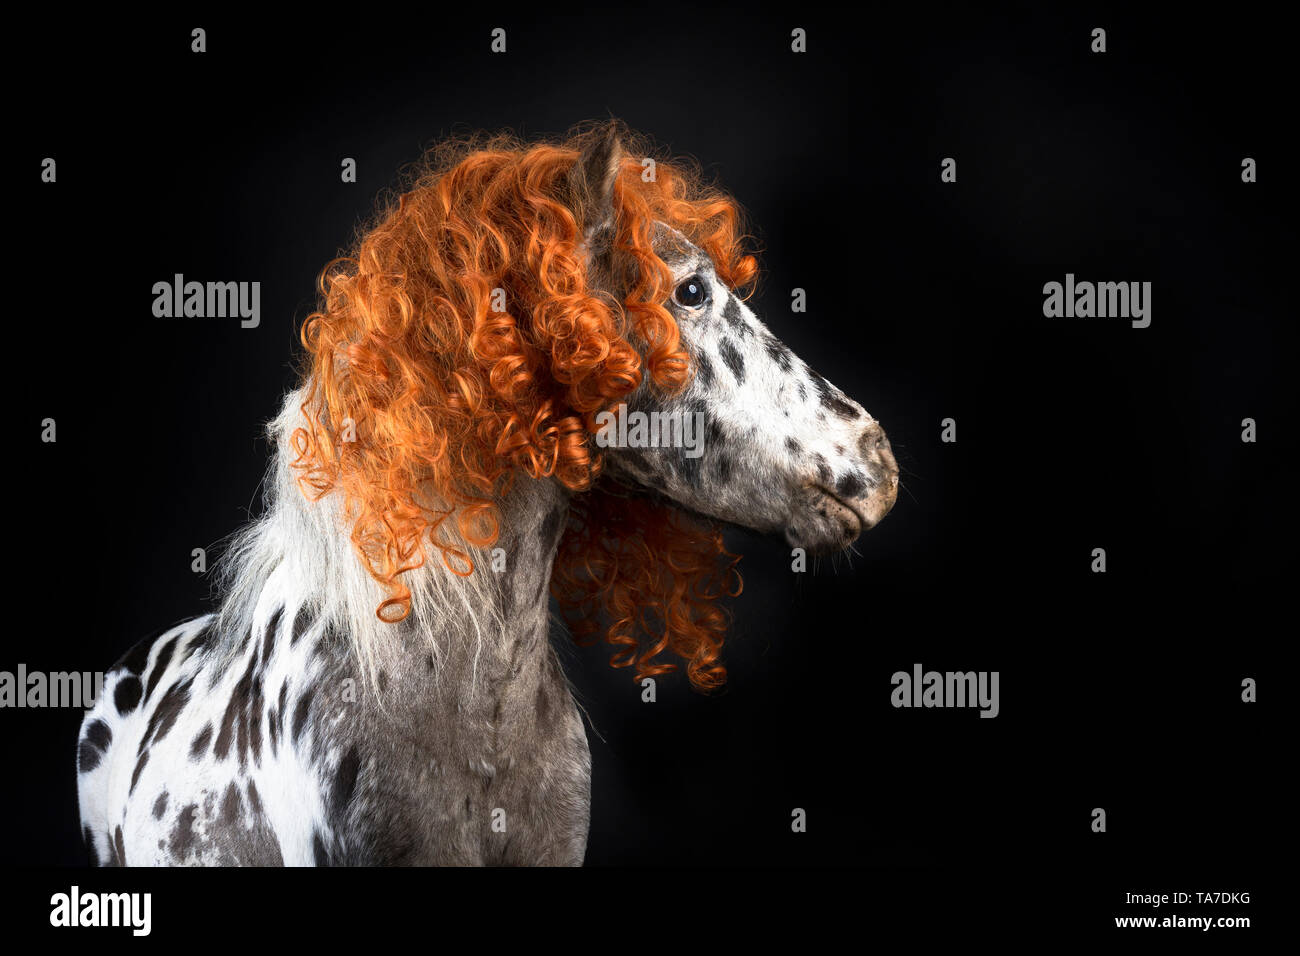 Miniature Appaloosa. Portrait of adult horse, wearing curly wig. Studio picture against a black background. Germany Stock Photo